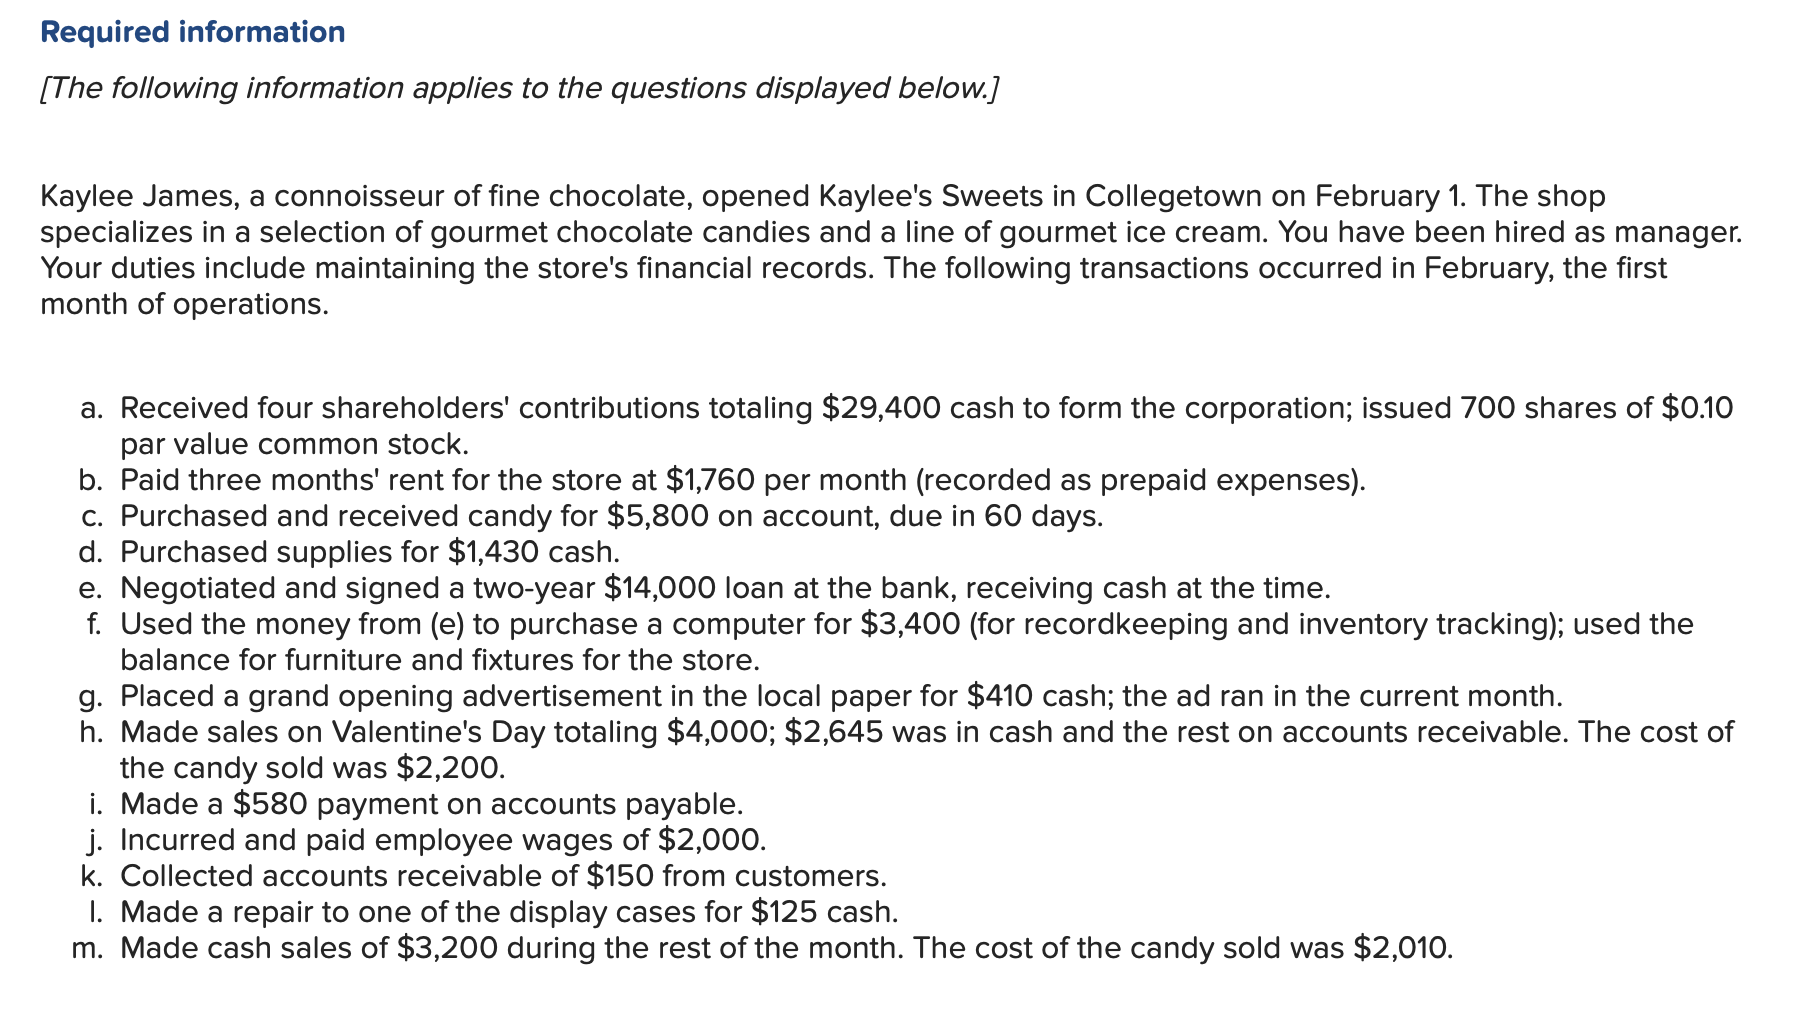 Required information
[The following information applies to the questions displayed below.]
Kaylee James, a connoisseur of fine chocolate, opened Kaylee's Sweets in Collegetown
specializes in a selection of gourmet chocolate candies and a line of gourmet ice cream. You have been hired as manager.
Your duties include maintaining the store's financial records. The following transactions occurred in February, the first
month of operations.
on February 1. The shop
a. Received four shareholders' contributions totaling $29,400 cash to form the corporation; issued 700 shares of $0.10
par value common stock
b. Paid three months' rent for the store at $1,760 per month (recorded as prepaid expenses).
c. Purchased and received candy for $5,800 on account, due in 60 days.
d. Purchased supplies for $1,430 cash
e. Negotiated and signed a two-year $14,000 loan at the bank, receiving cash at the time.
f. Used the money from (e) to purchase a computer for $3,400 (for recordkeeping and inventory tracking); used the
balance for furniture and fixtures for the store.
g. Placed a grand opening advertisement in the local paper for $410 cash; the ad ran in the current month
h. Made sales on Valentine's Day totaling $4,000; $2,645 was in cash and the rest on accounts receivable. The cost of
the candy sold was $2,200.
i. Made a $580 payment on accounts payable.
j. Incurred and paid employee wages of $2,000
k. Collected accounts receivable of $150 from customers.
I. Made a repair to one of the display cases for $125 cash
m. Made cash sales of $3,200 during the rest of the month. The cost of the candy sold was $2,010.
